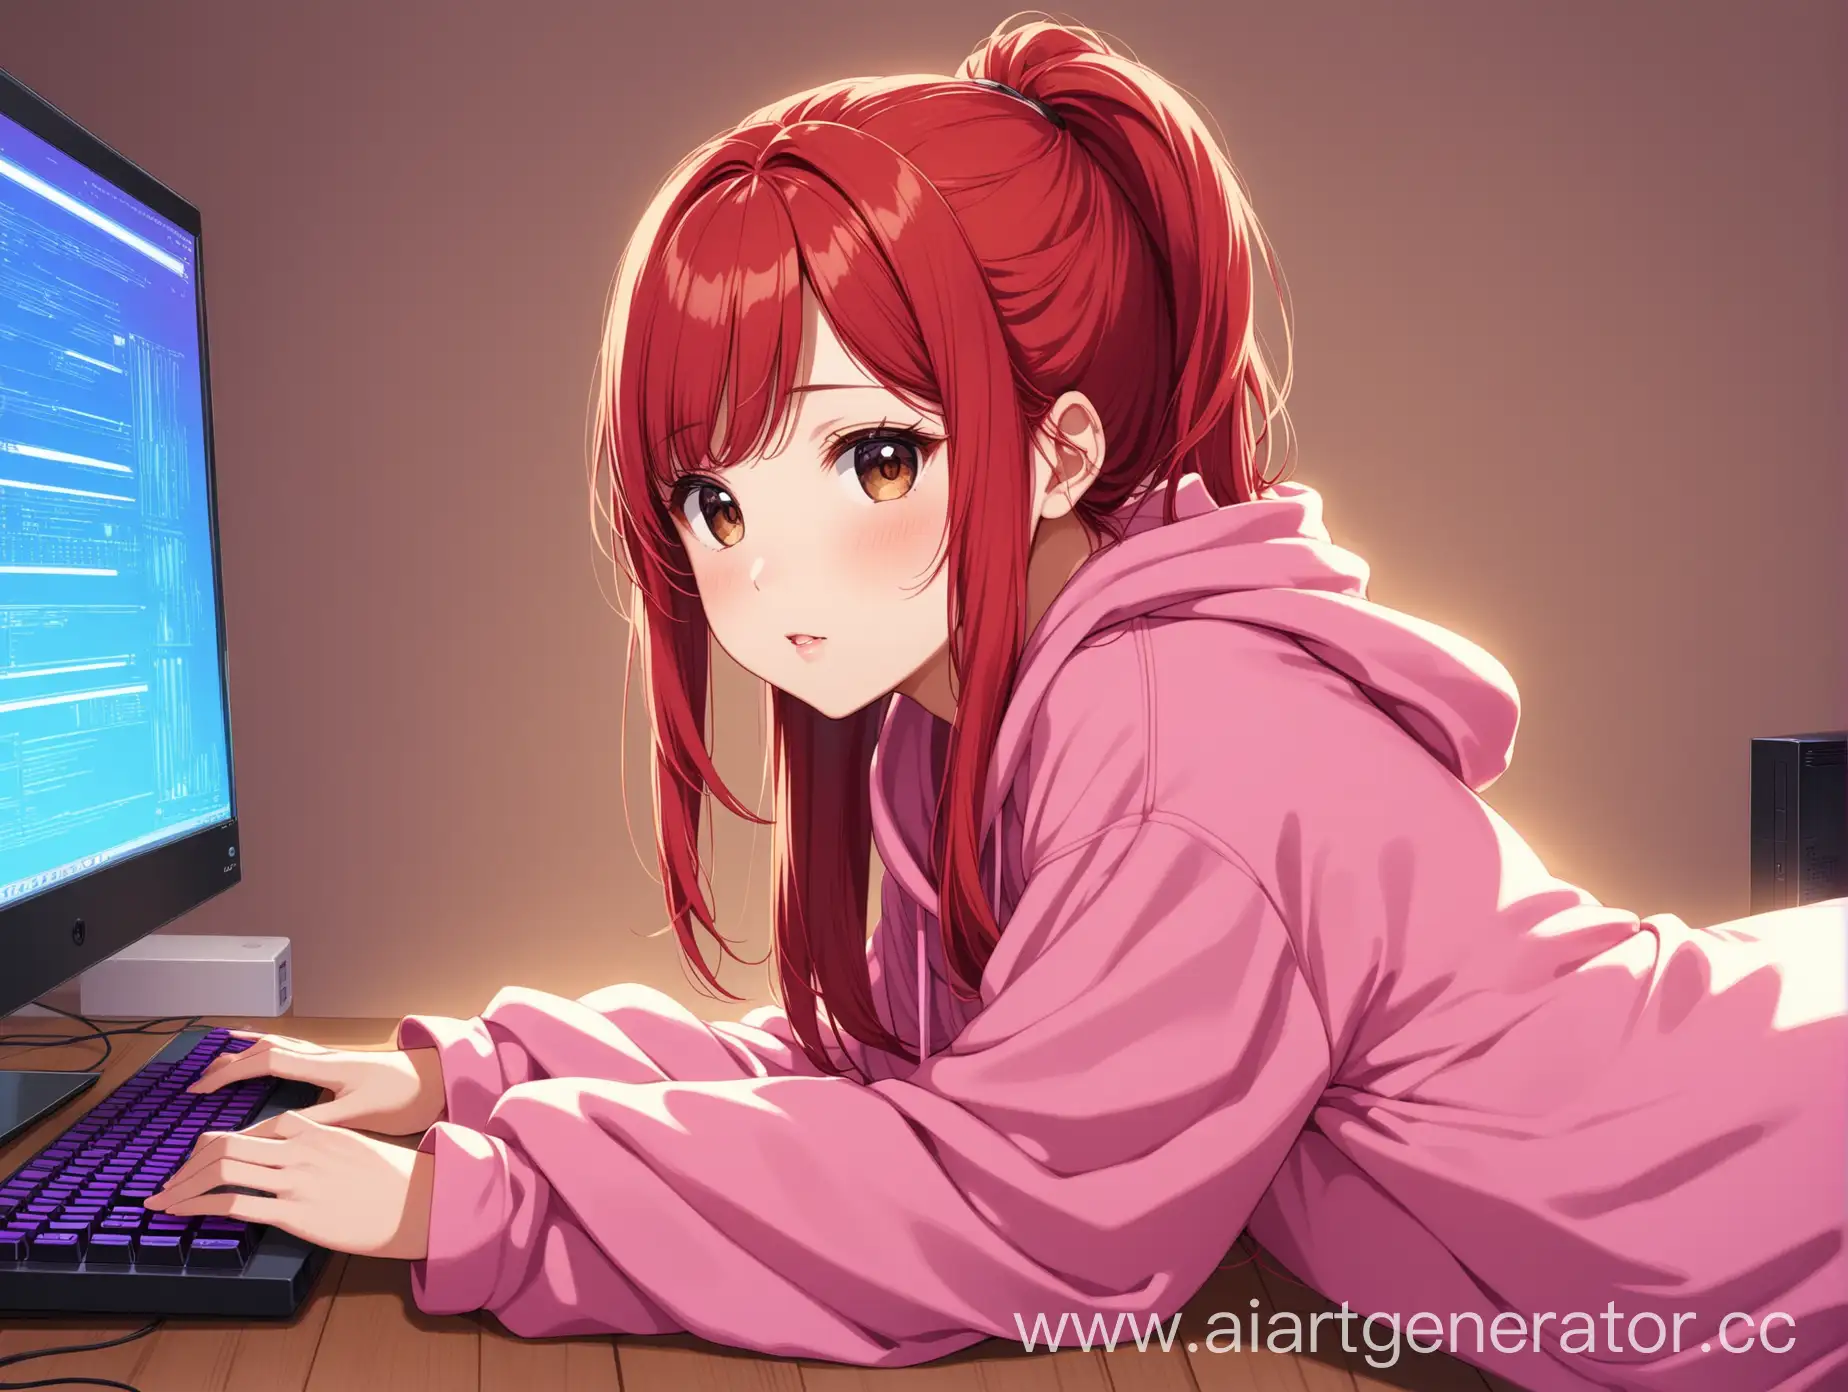 An image of a sexy girl, with a Korean hairstyle, red hair, brown eyes. The girl is in a room with beige walls, in which there is a computer with purple backlighting and a pink keyboard. The girl is dressed in a blue Stitch kigurumi, She is turned sideways and looking at me. Image size 2560x1440